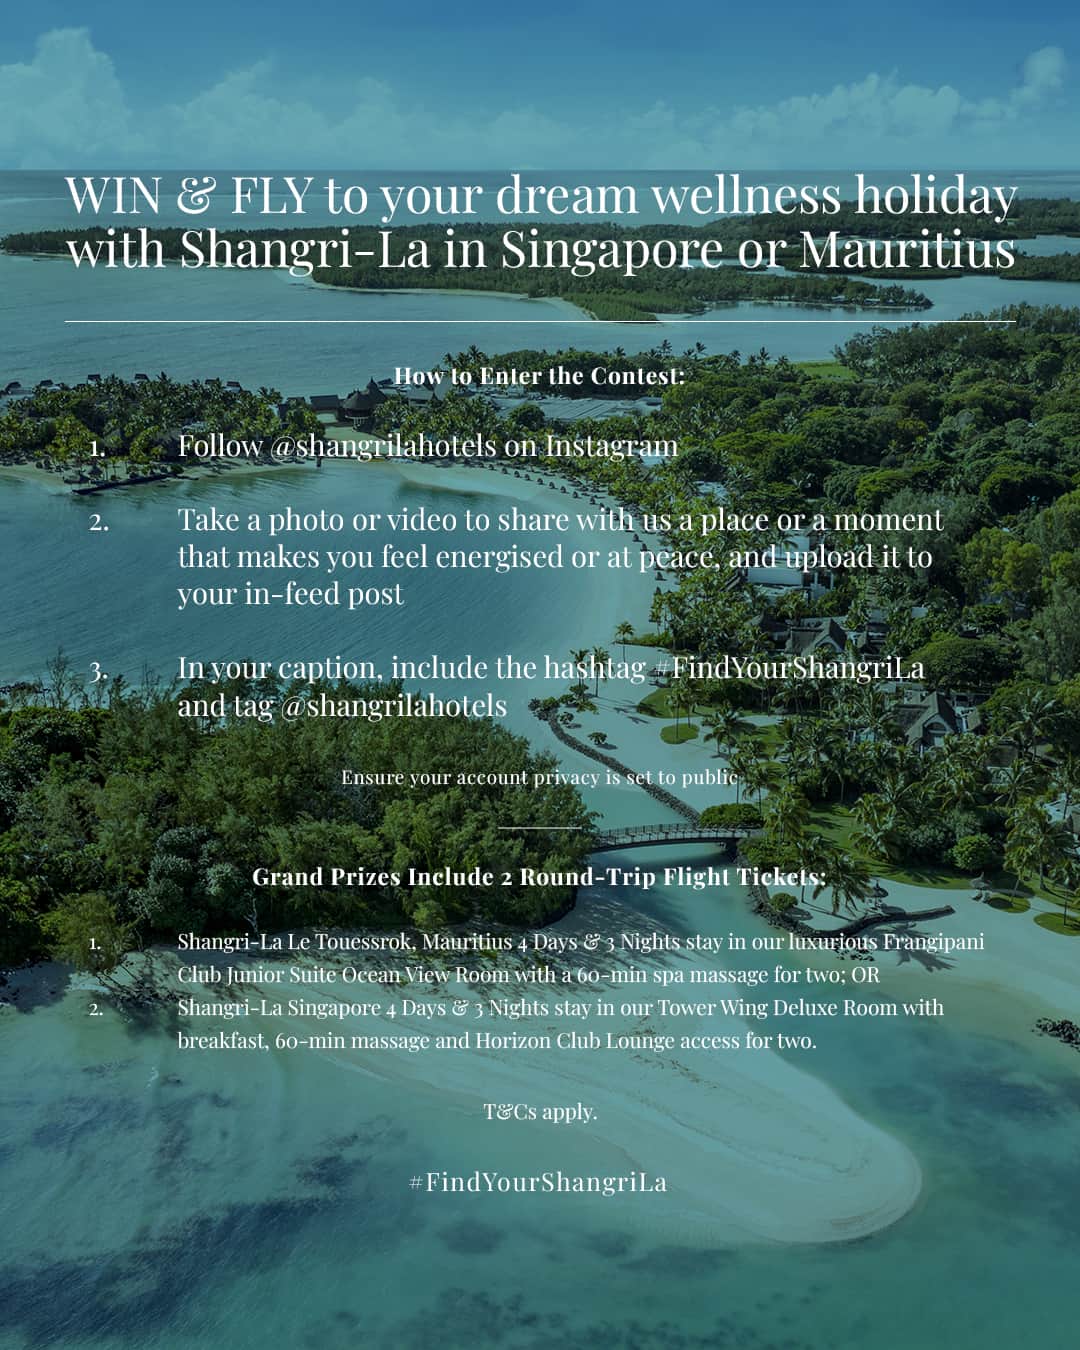 Shangri-La Hotel, Tokyoさんのインスタグラム写真 - (Shangri-La Hotel, TokyoInstagram)「[#FindYourShangriLa Contest] ⁣ ⁣ WIN & FLY to your dream wellness holiday in Shangri-La Singapore or Shangri-La Le Touessrok, Mauritius for 4 Days & 3 Nights, inclusive of 2 round-trip flight tickets!⁣ With your accommodation and return air tickets covered, all you have to do is bring yourself and your loved ones. ⁣ ⁣ For a chance to win, simply take a creative photo or record a video of your personal ShangriLa, a place or moment of zen that makes you feel at peace and relaxed, wherever you are in the world.⁣ ⁣ Head over to our Instagram @shangrilahotels for more details⁣ ⁣ #FindYourShangriLa のブランドキャンペーンにちなんで、 ⁣ ⁣ ペア往復航空券を含む3泊4日のシャングリ・ラ シンガポール、またはモーリシャスのシャングリ・ラ ル トゥエスロックでの夢のウェルネス ホリデイが当たる投稿コンテストを開催中です。⁣ ⁣  応募に必要なのは'安らぎとリラックス'をテーマにしたあなただけのシャングリ・ラな瞬間を、クリエイティブに切り取った写真か想像力あふれる動画で投稿するだけです。⁣ ⁣  参加方法詳細については、 @shangrilahotels アカウントをご覧ください。⁣ ⁣ #FindYourShangriLa #ShangriLa #ShangriLaHotels #ShangriLaCircle #FindYourShangriLaContest #ShangriLaSingapore #ShangriLaMauritius #Singapore #Mauritius #WellnessRoutine #HealthandWellness #Fitness⁣」8月25日 21時00分 - shangrila_tokyo